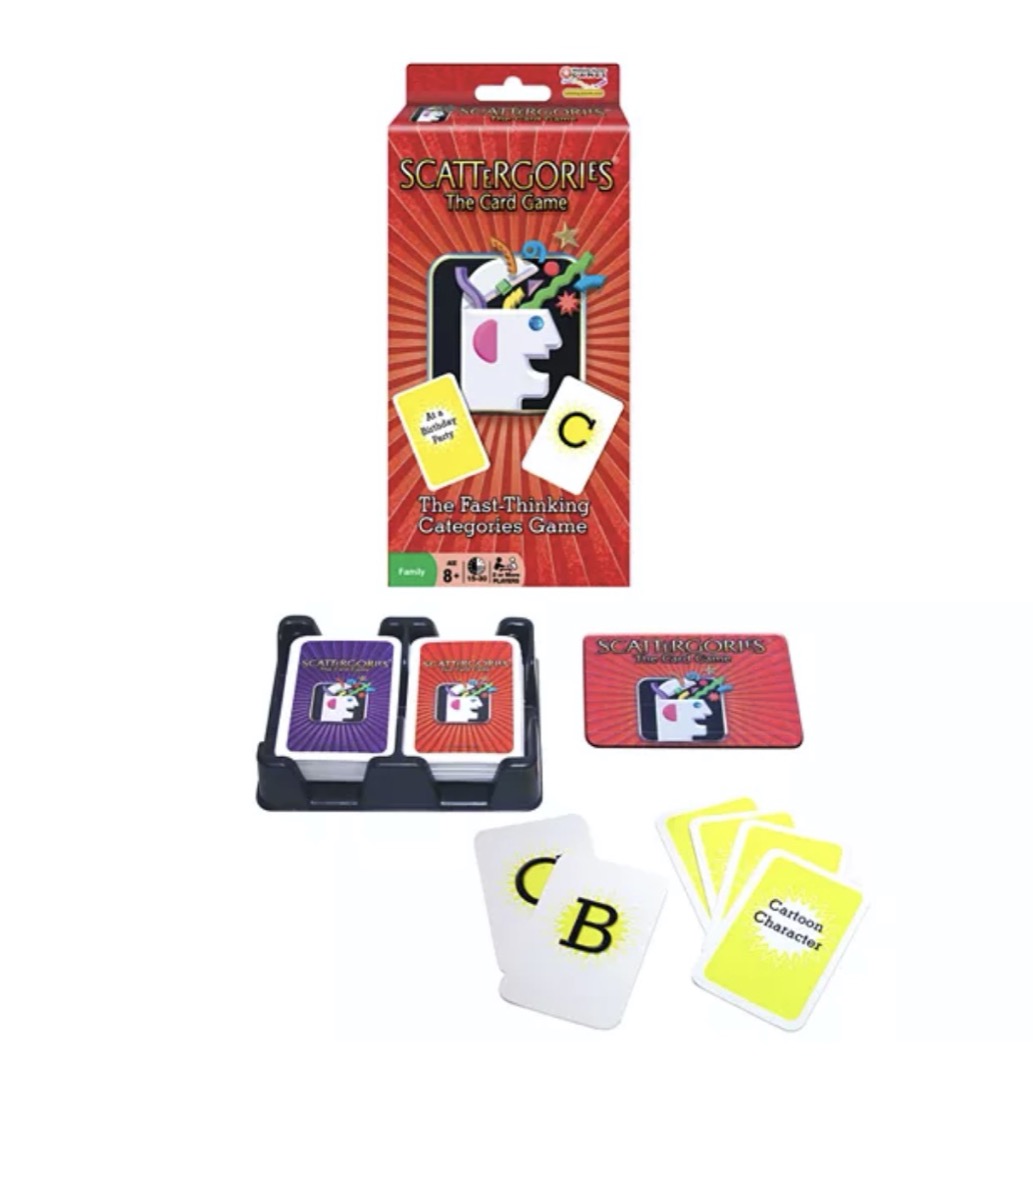 Scattergories card game